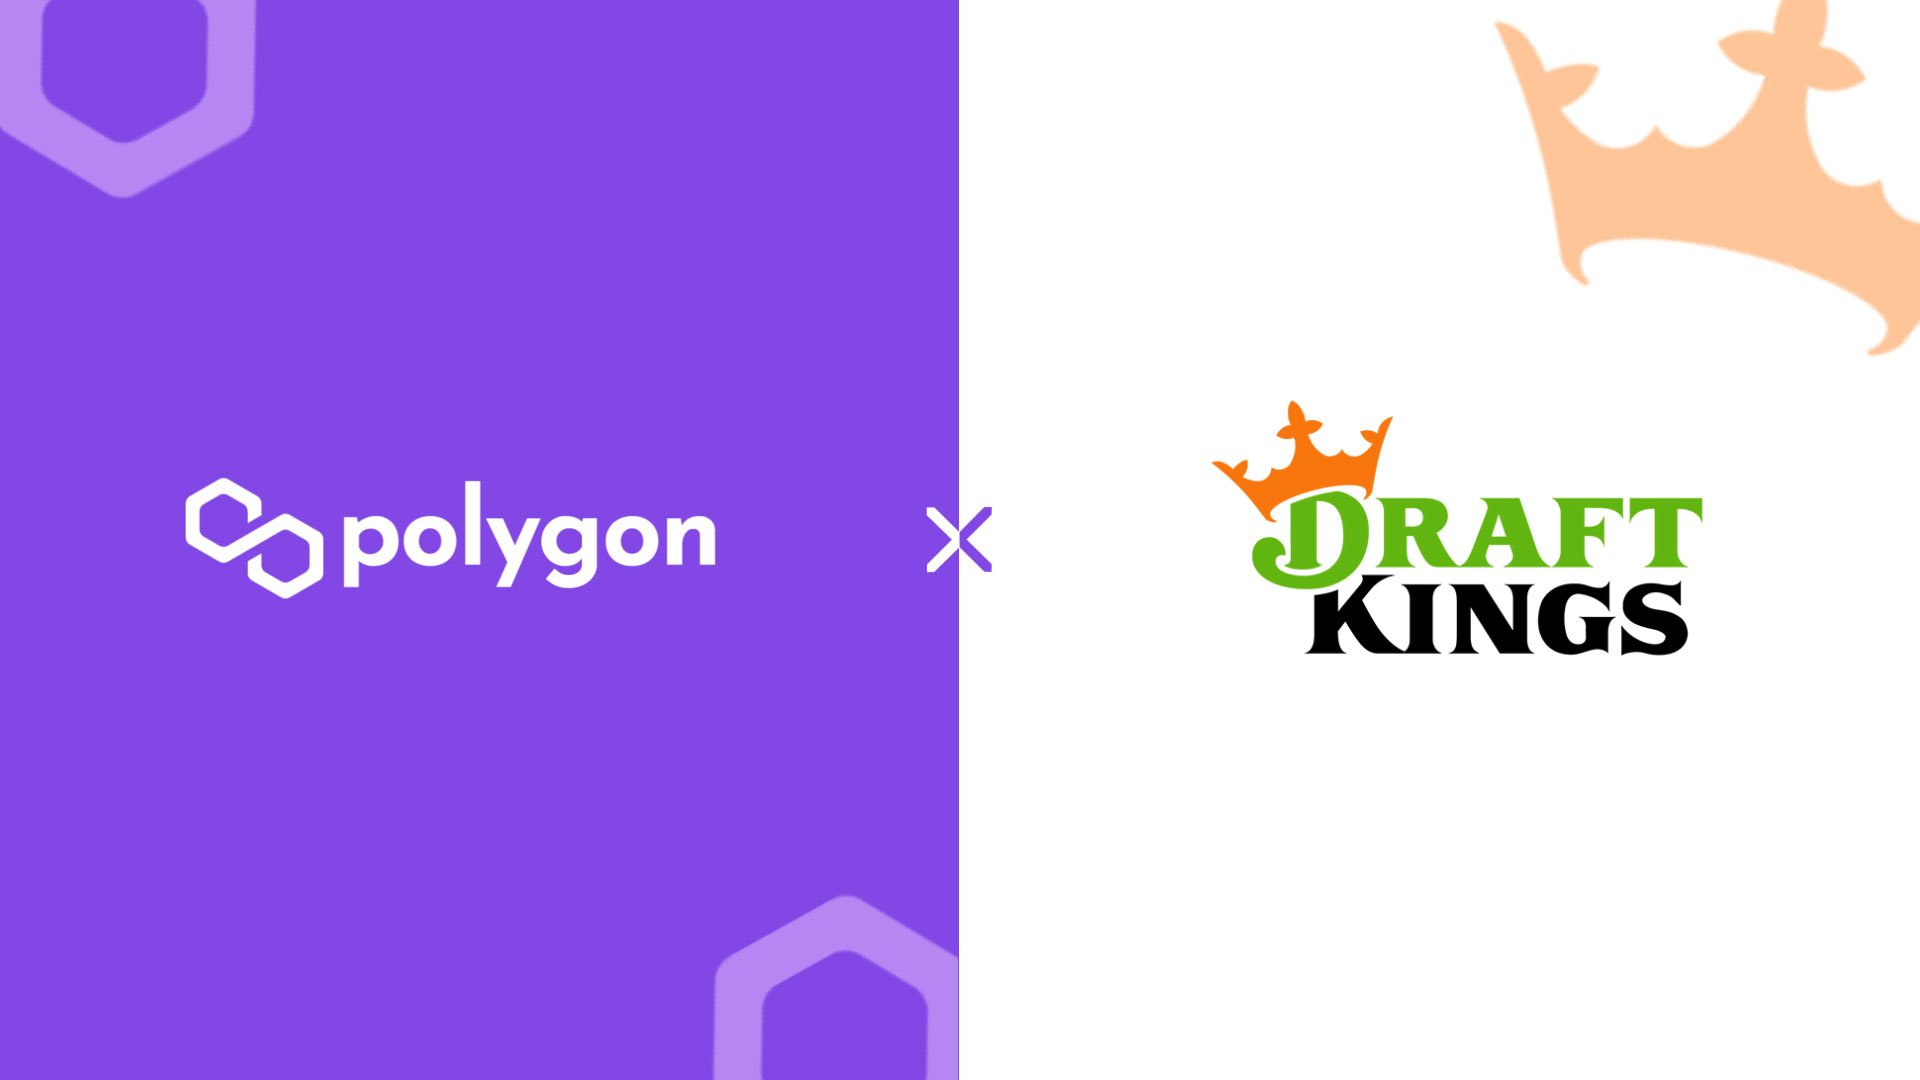 DraftKings Accuses Polygon of Granting Special Favoritism